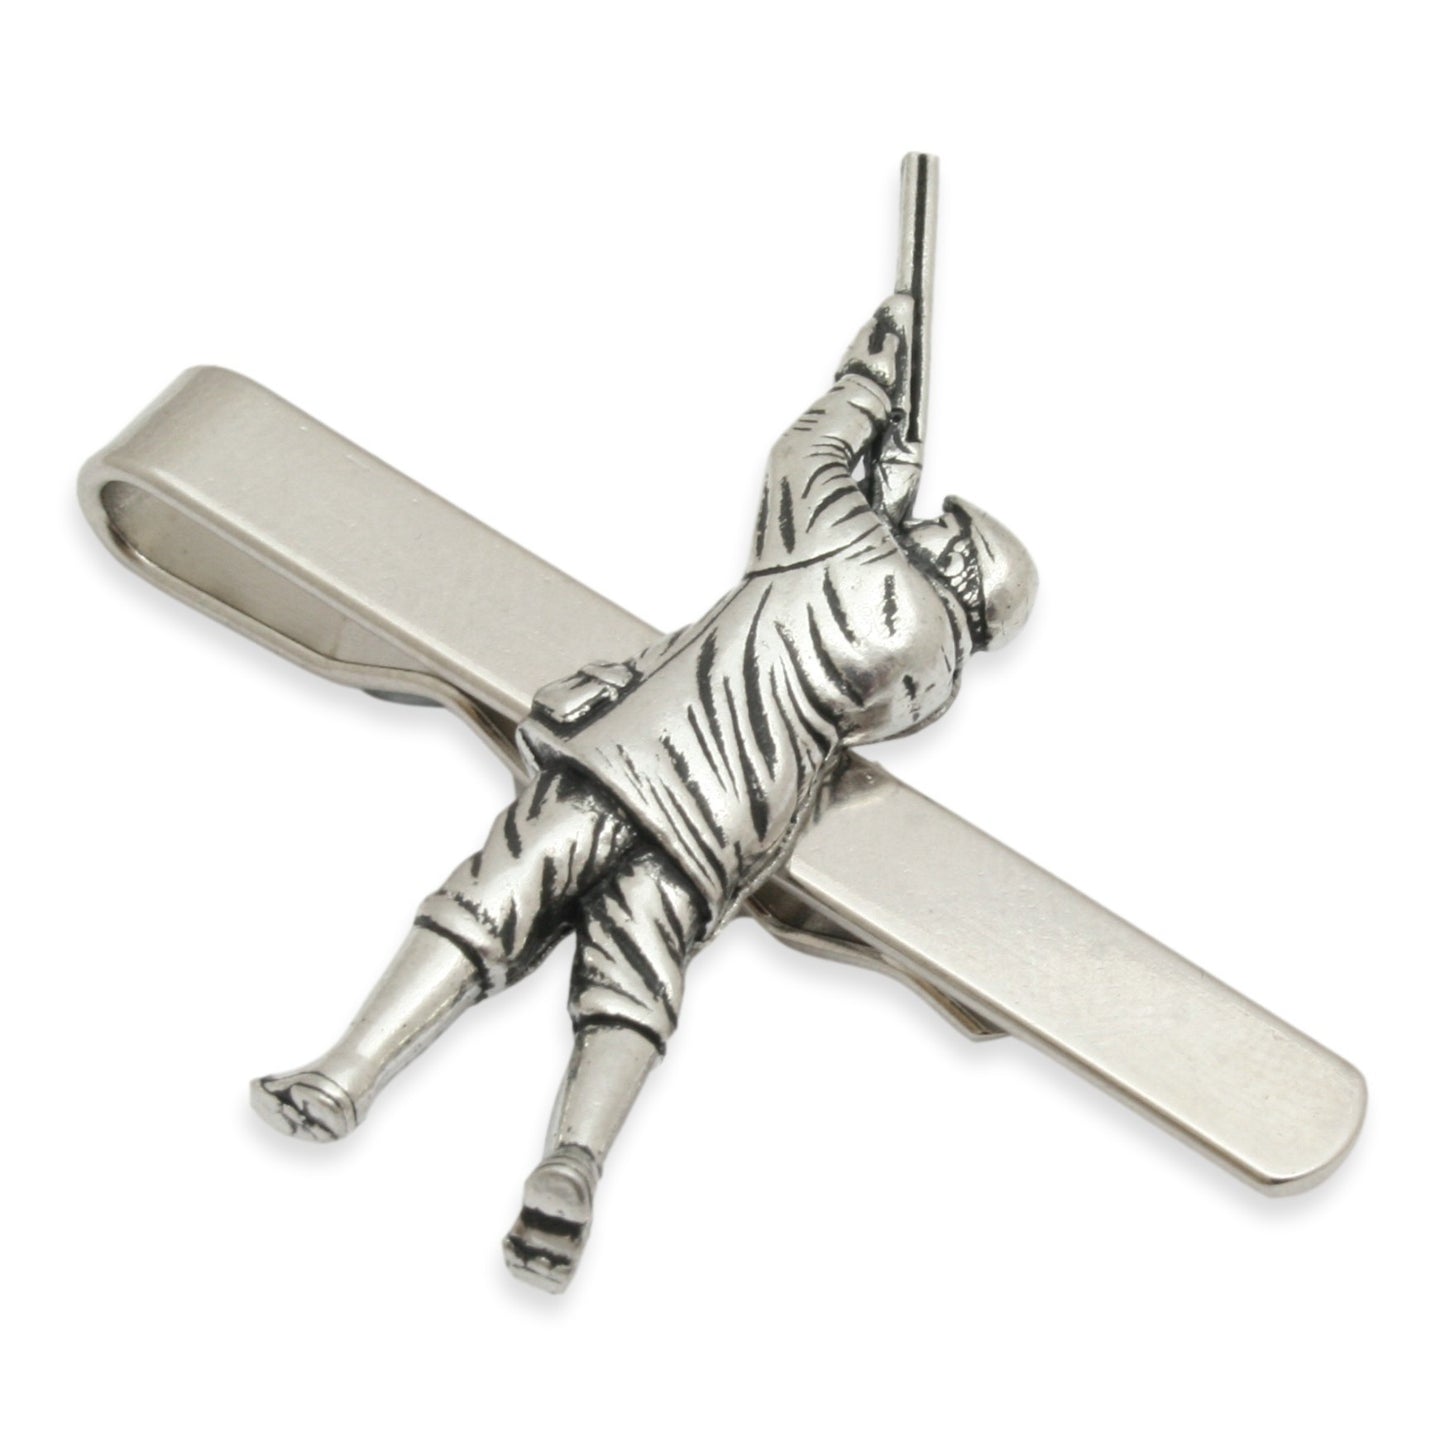 Game Shooter Tie Clip